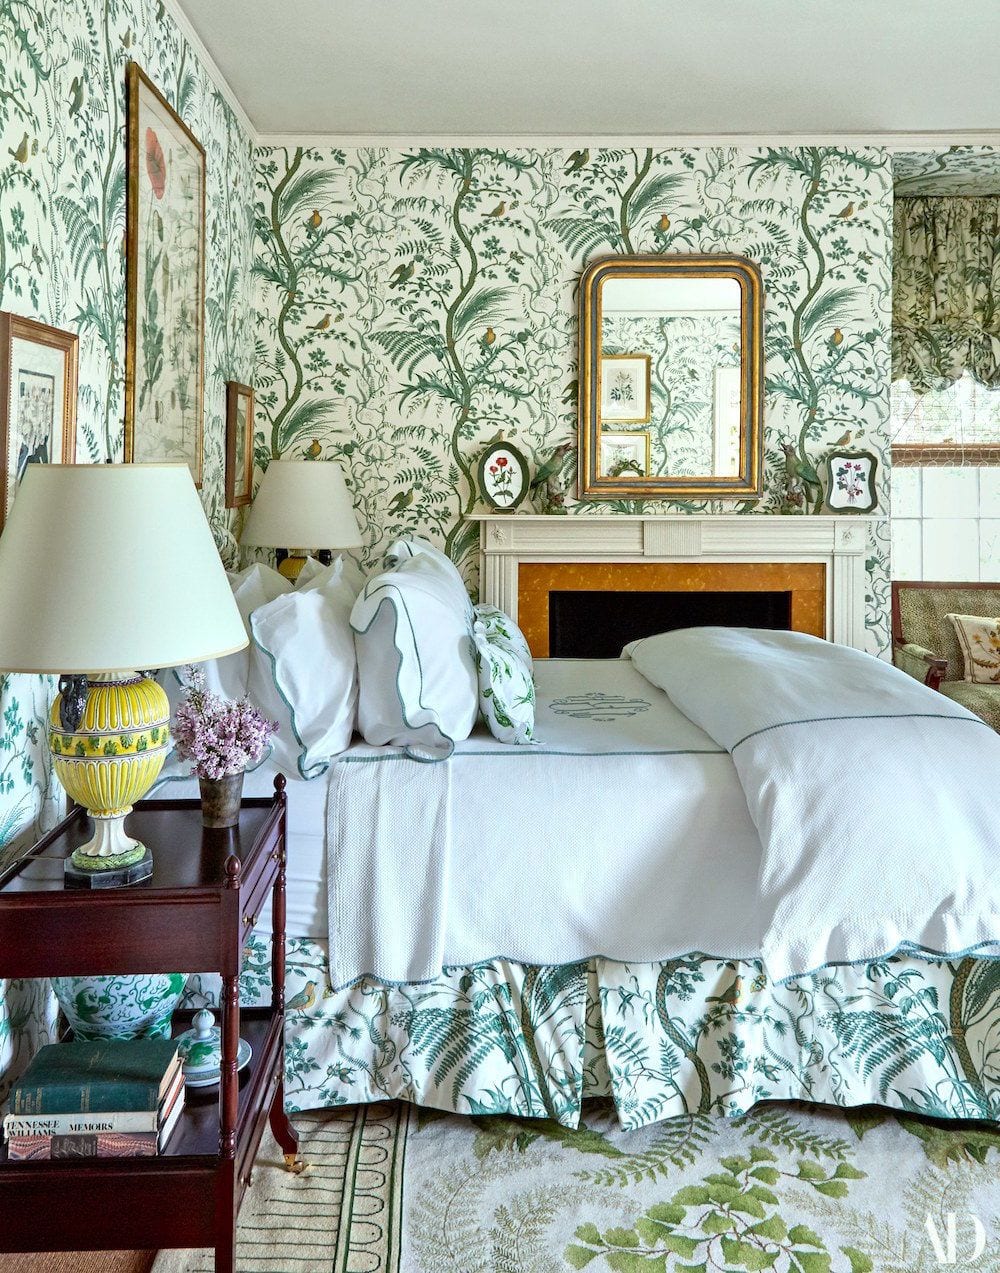 Architectural Digest - Tory Burch Green and White bedroom - Brunschwig and Fils - Bird and Thistle